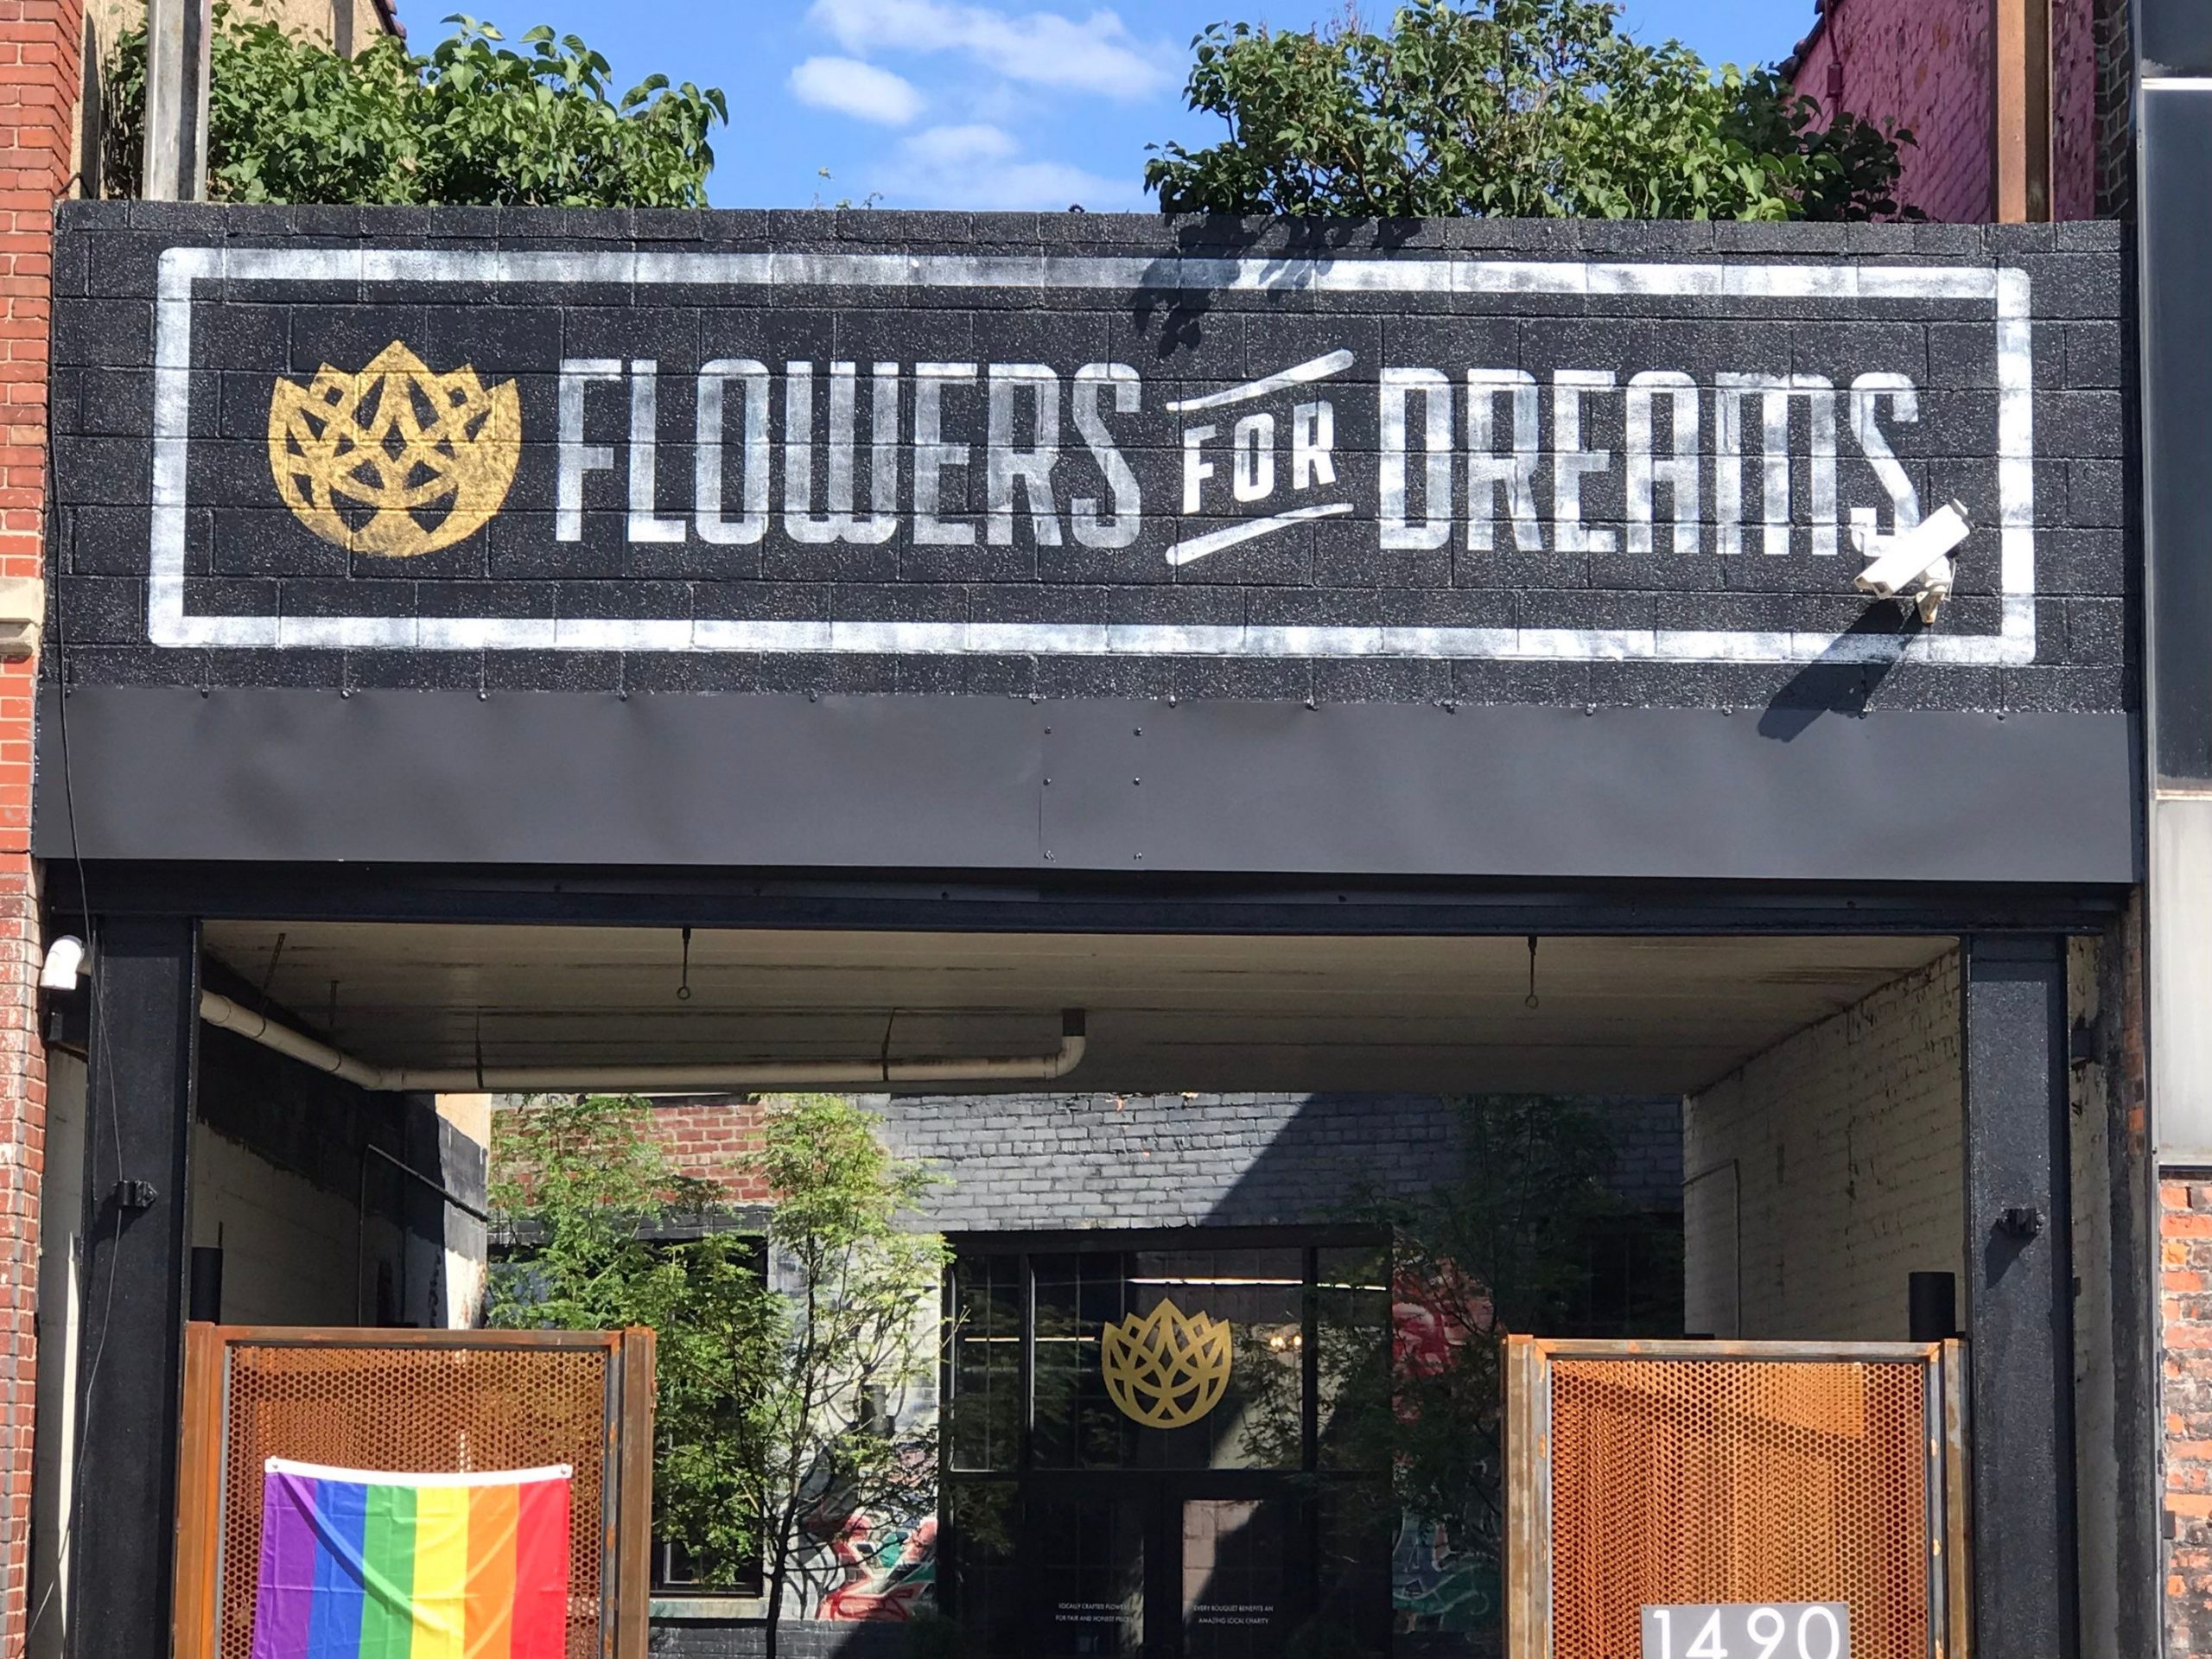 Flowers for Dreams painted on sign and window vinyl